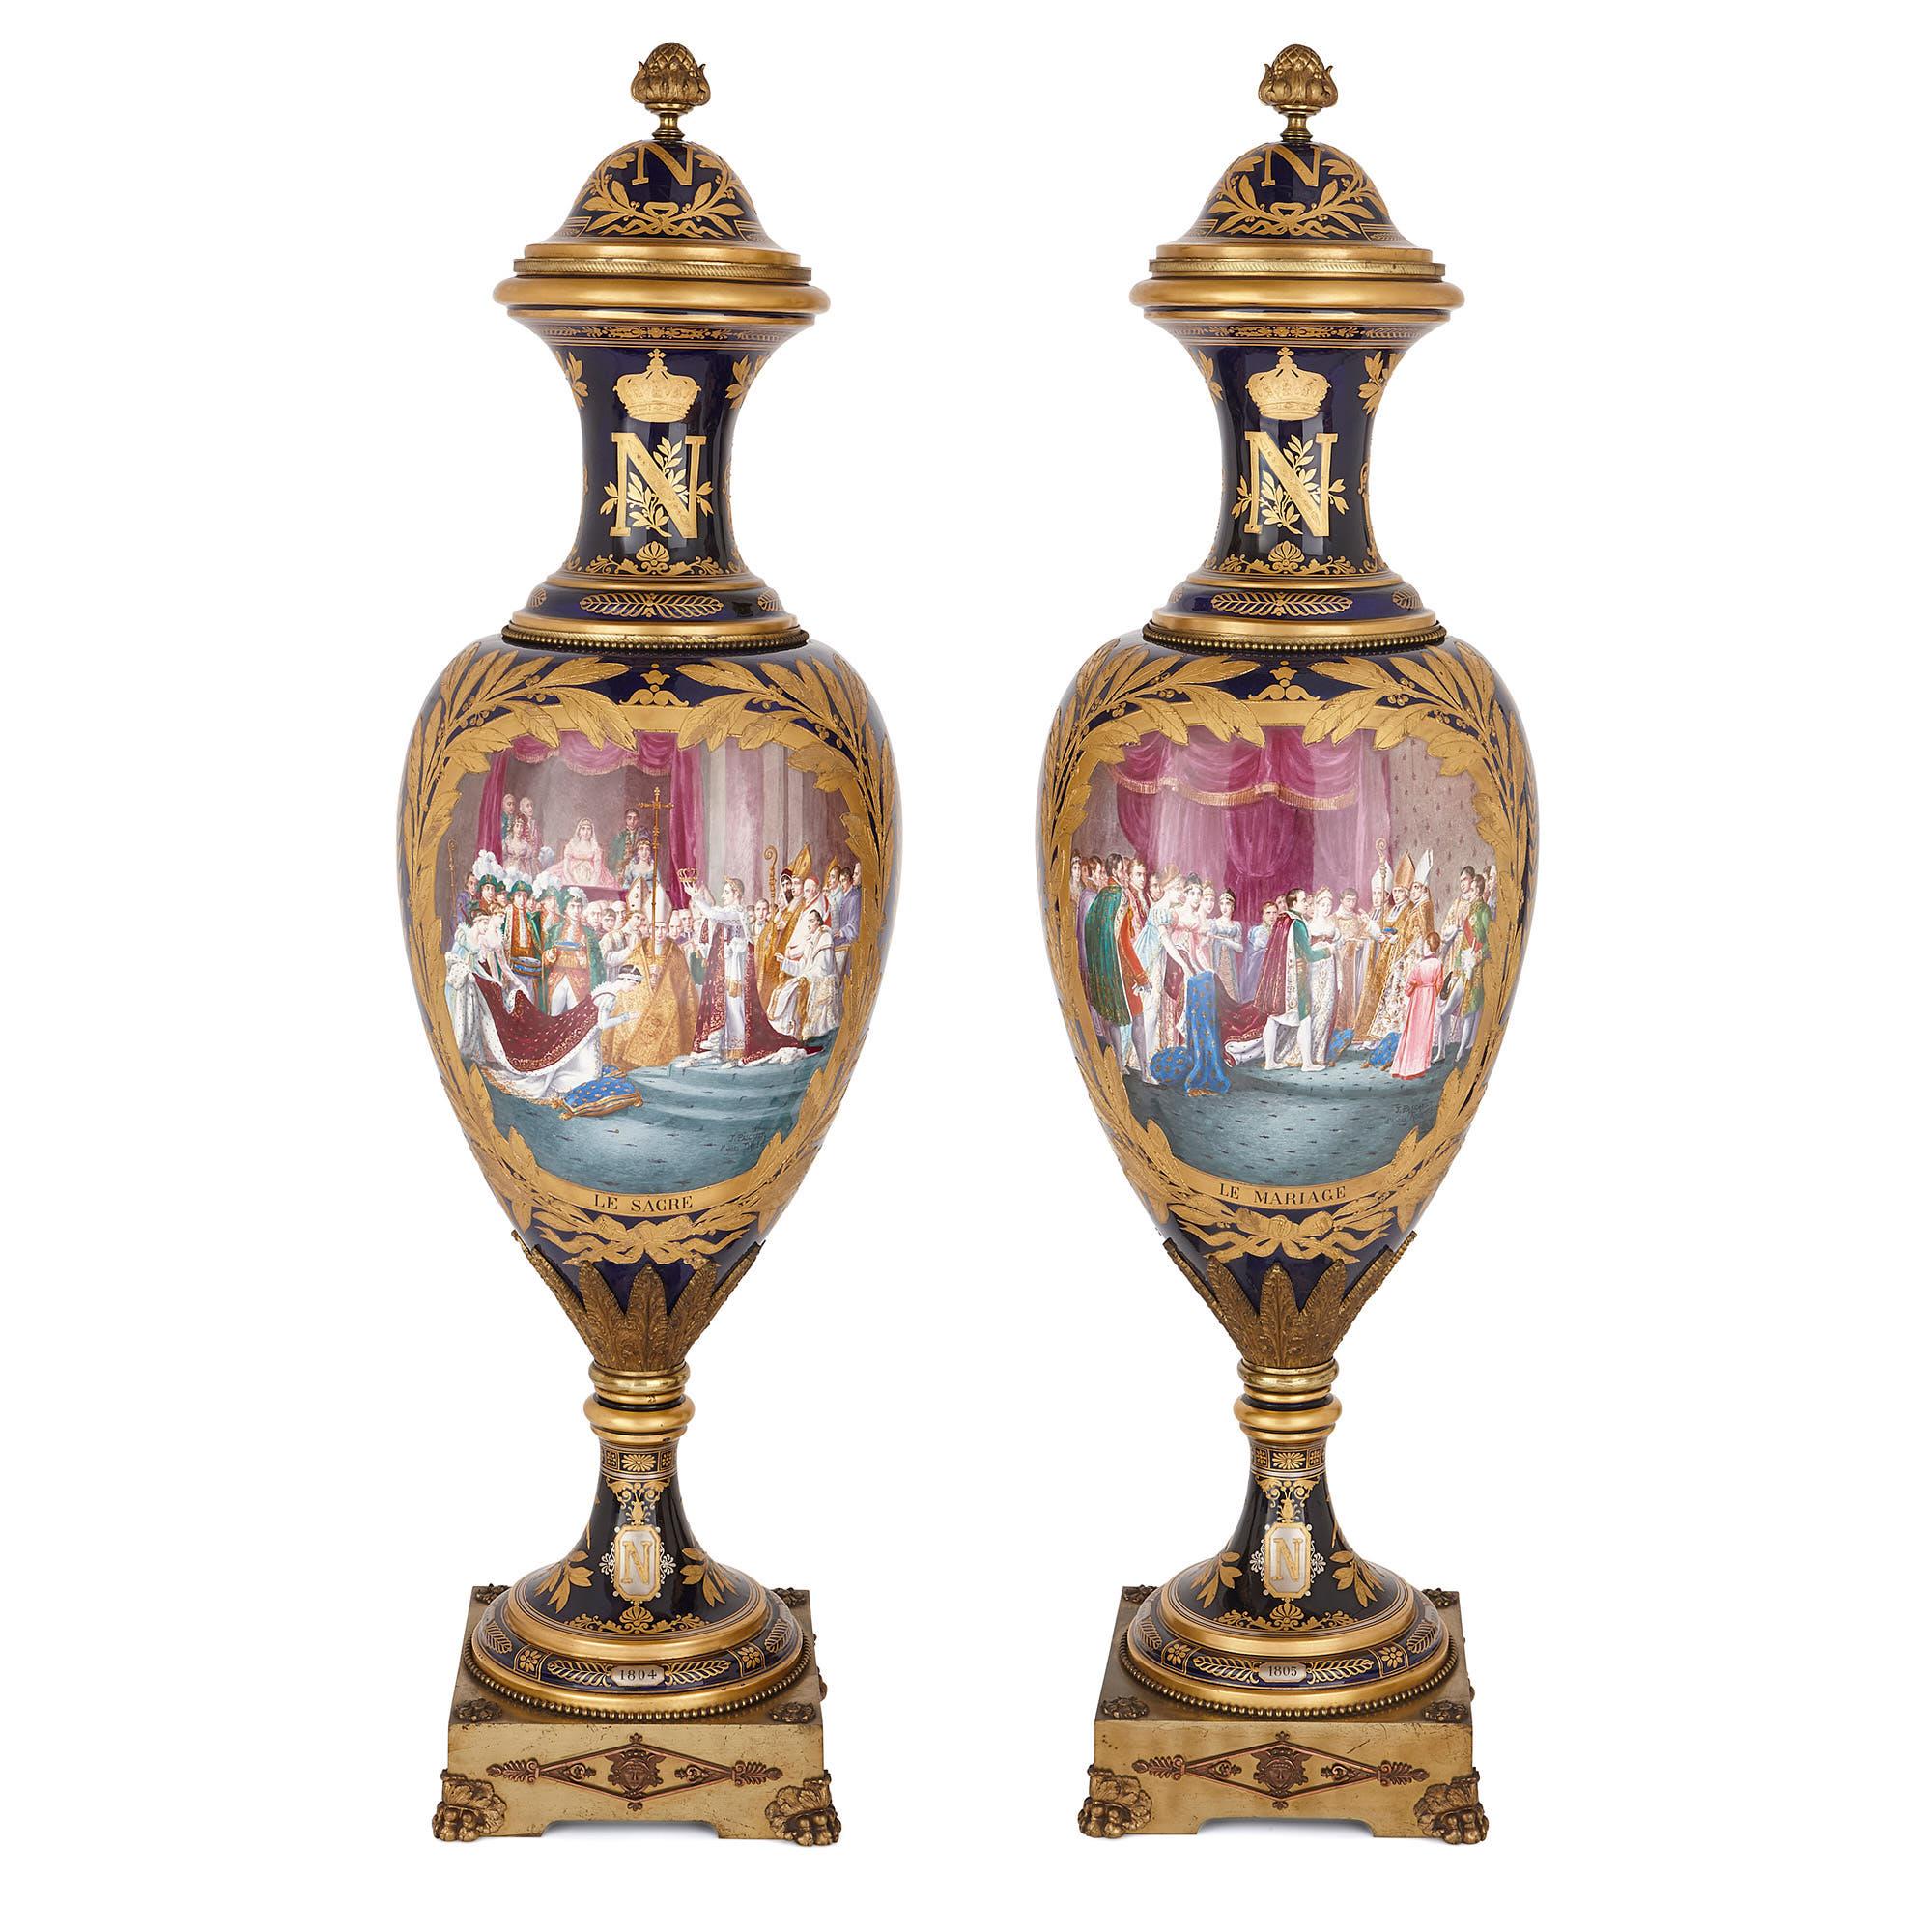 These exquisite painted porcelain vases were crafted in the late 19th century in France. They have been styled in the image 18th century Sèvres Porcelain, which continued to be very fashionable in Europe in this period. 

The oval-bodied porcelain